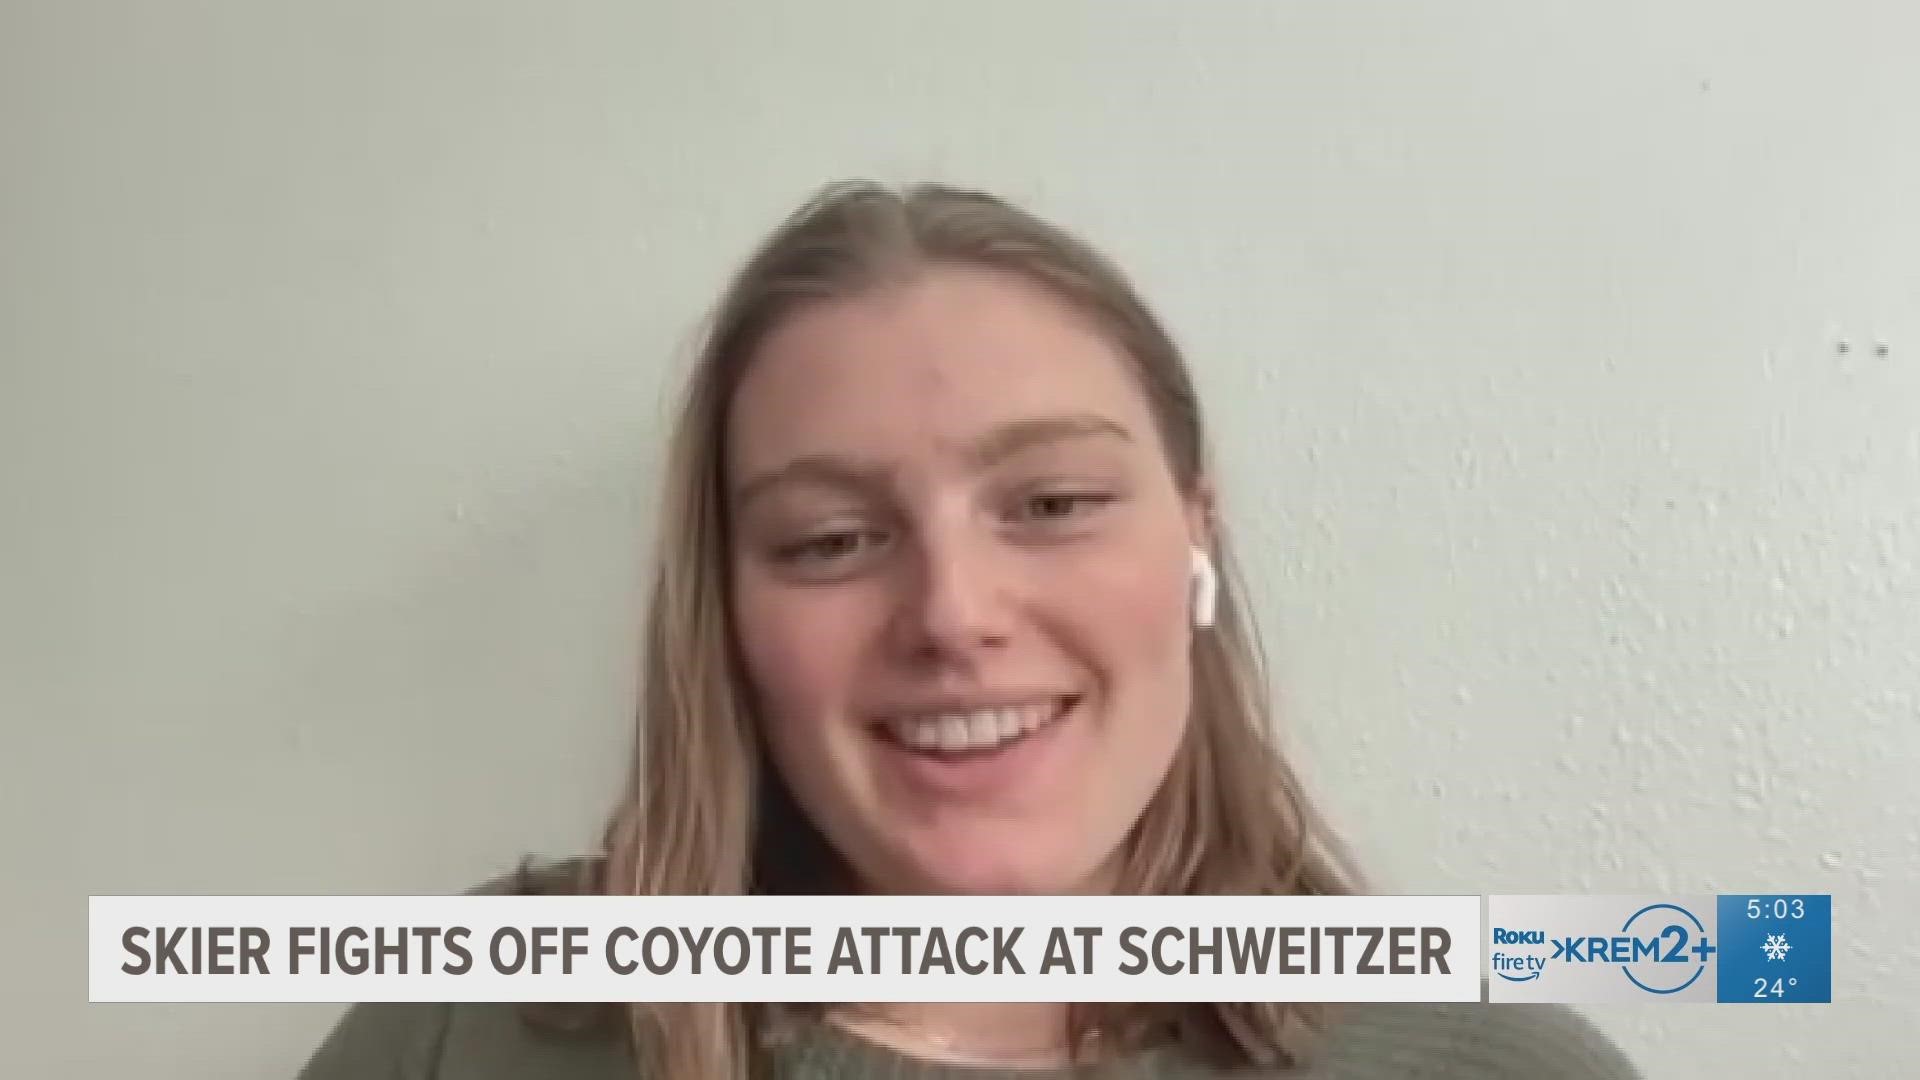 The Idaho Dept. of Fish and Game says coyote sightings have increased at Schweitzer, with one woman being attacked.